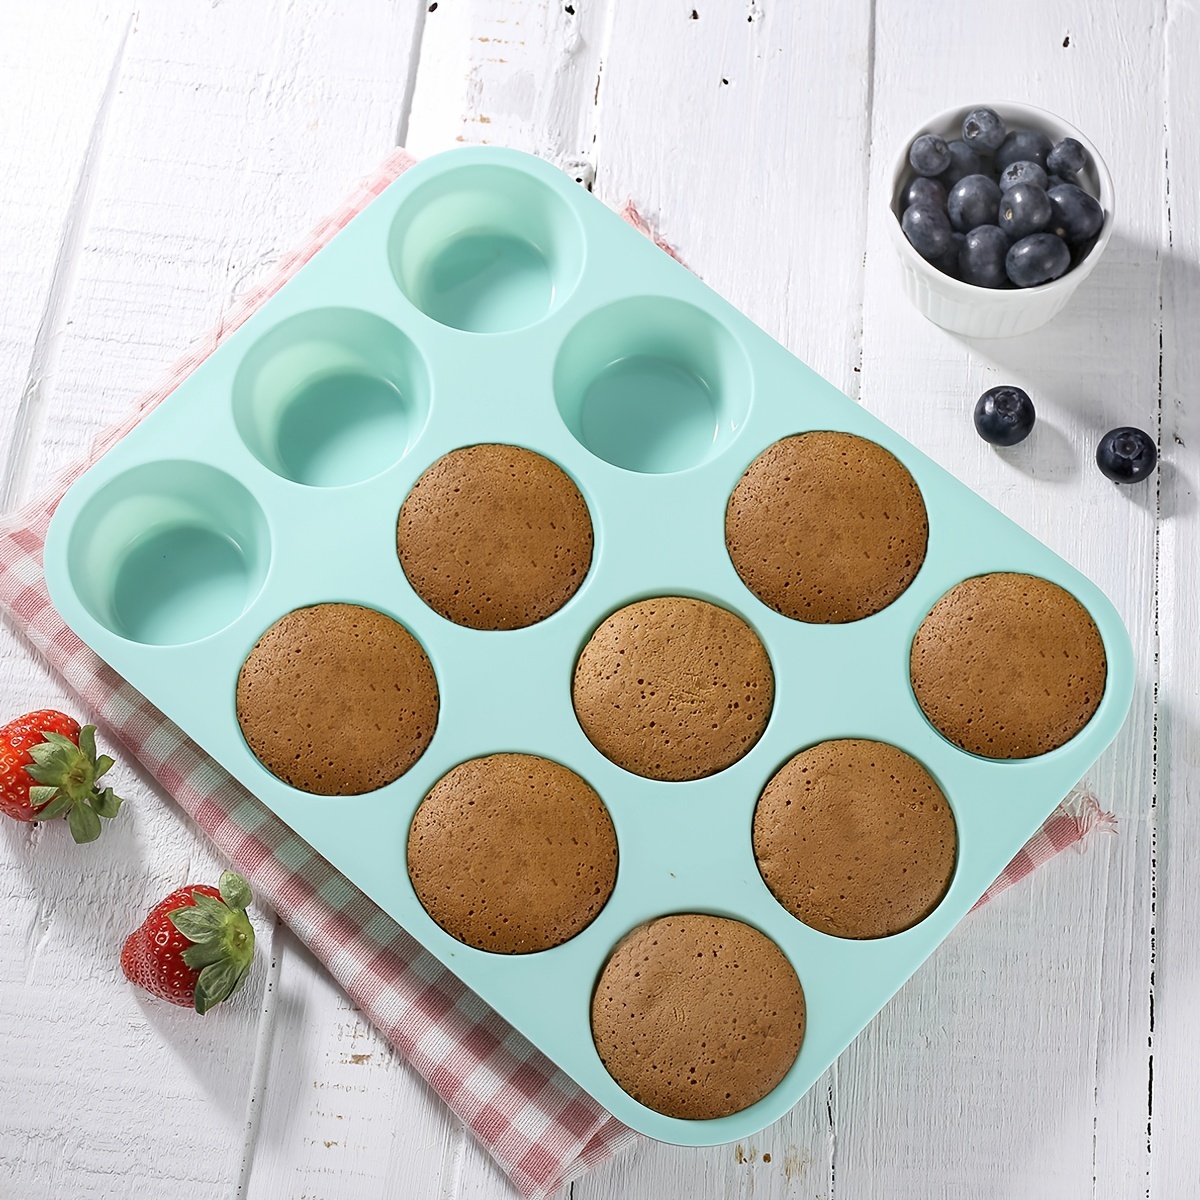 1pc Red 12 Cup Silicone Muffin Pan, Mini Cupcake Tray, Large Round